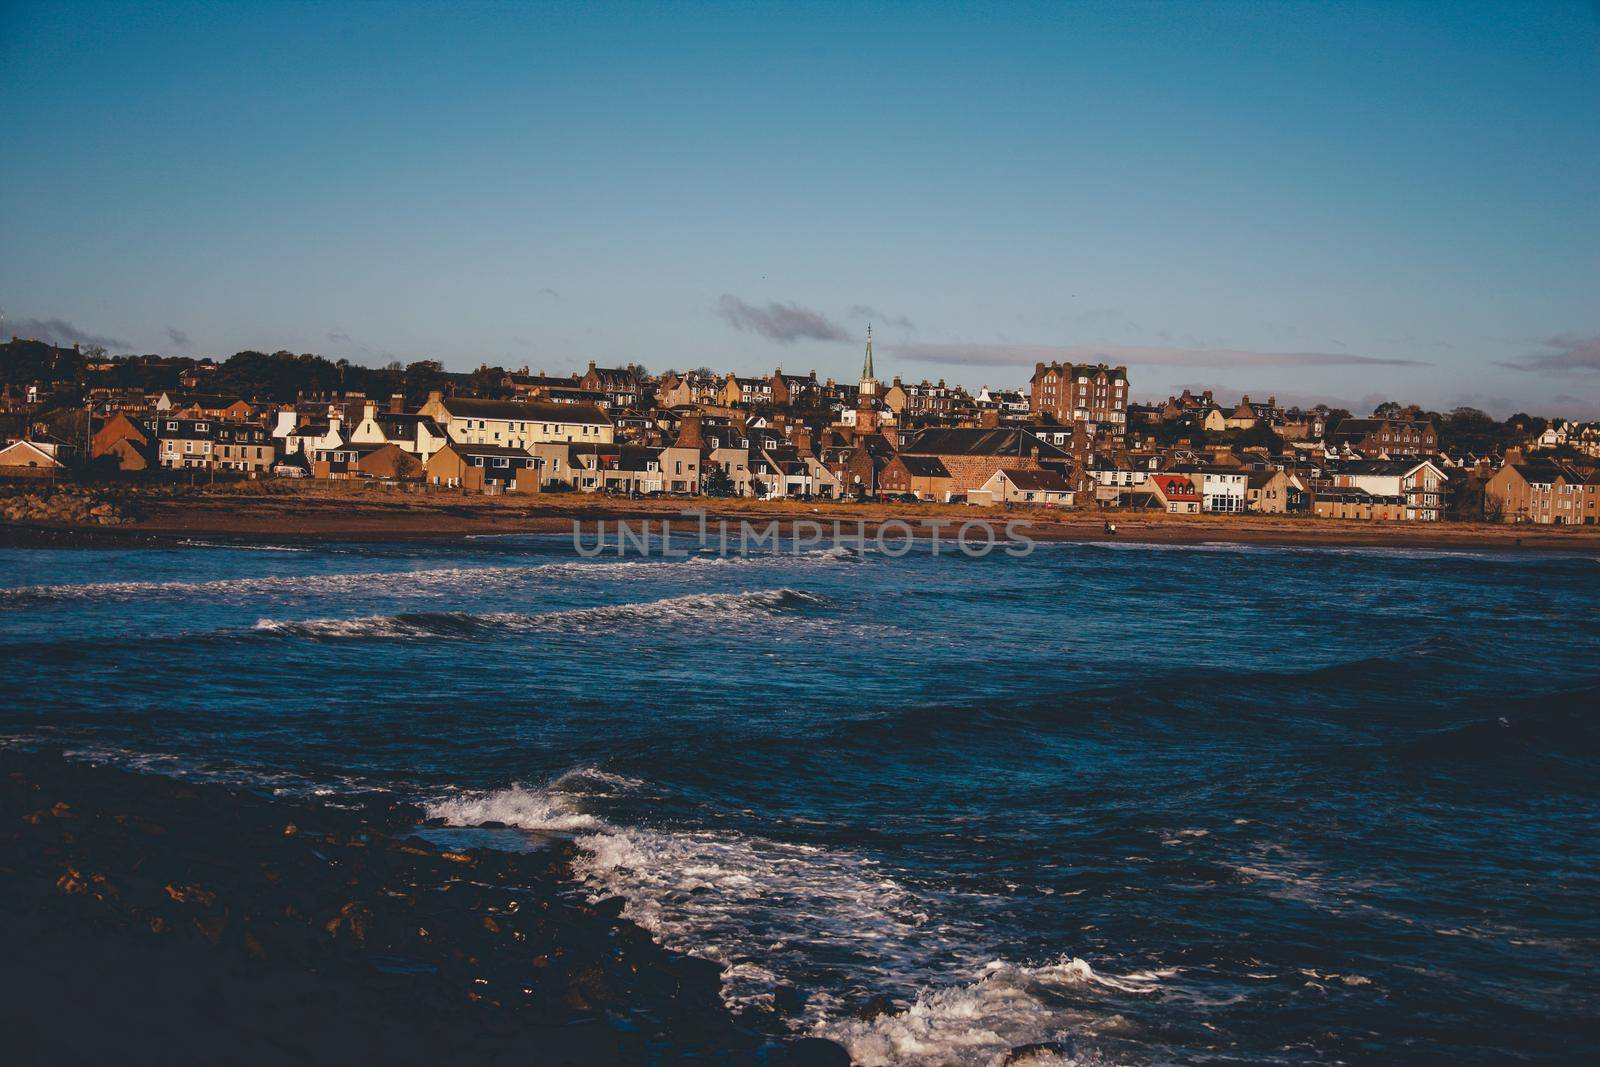 The beautiful City Stonehaven in Scotland, United Kingdom
 by Weltblick